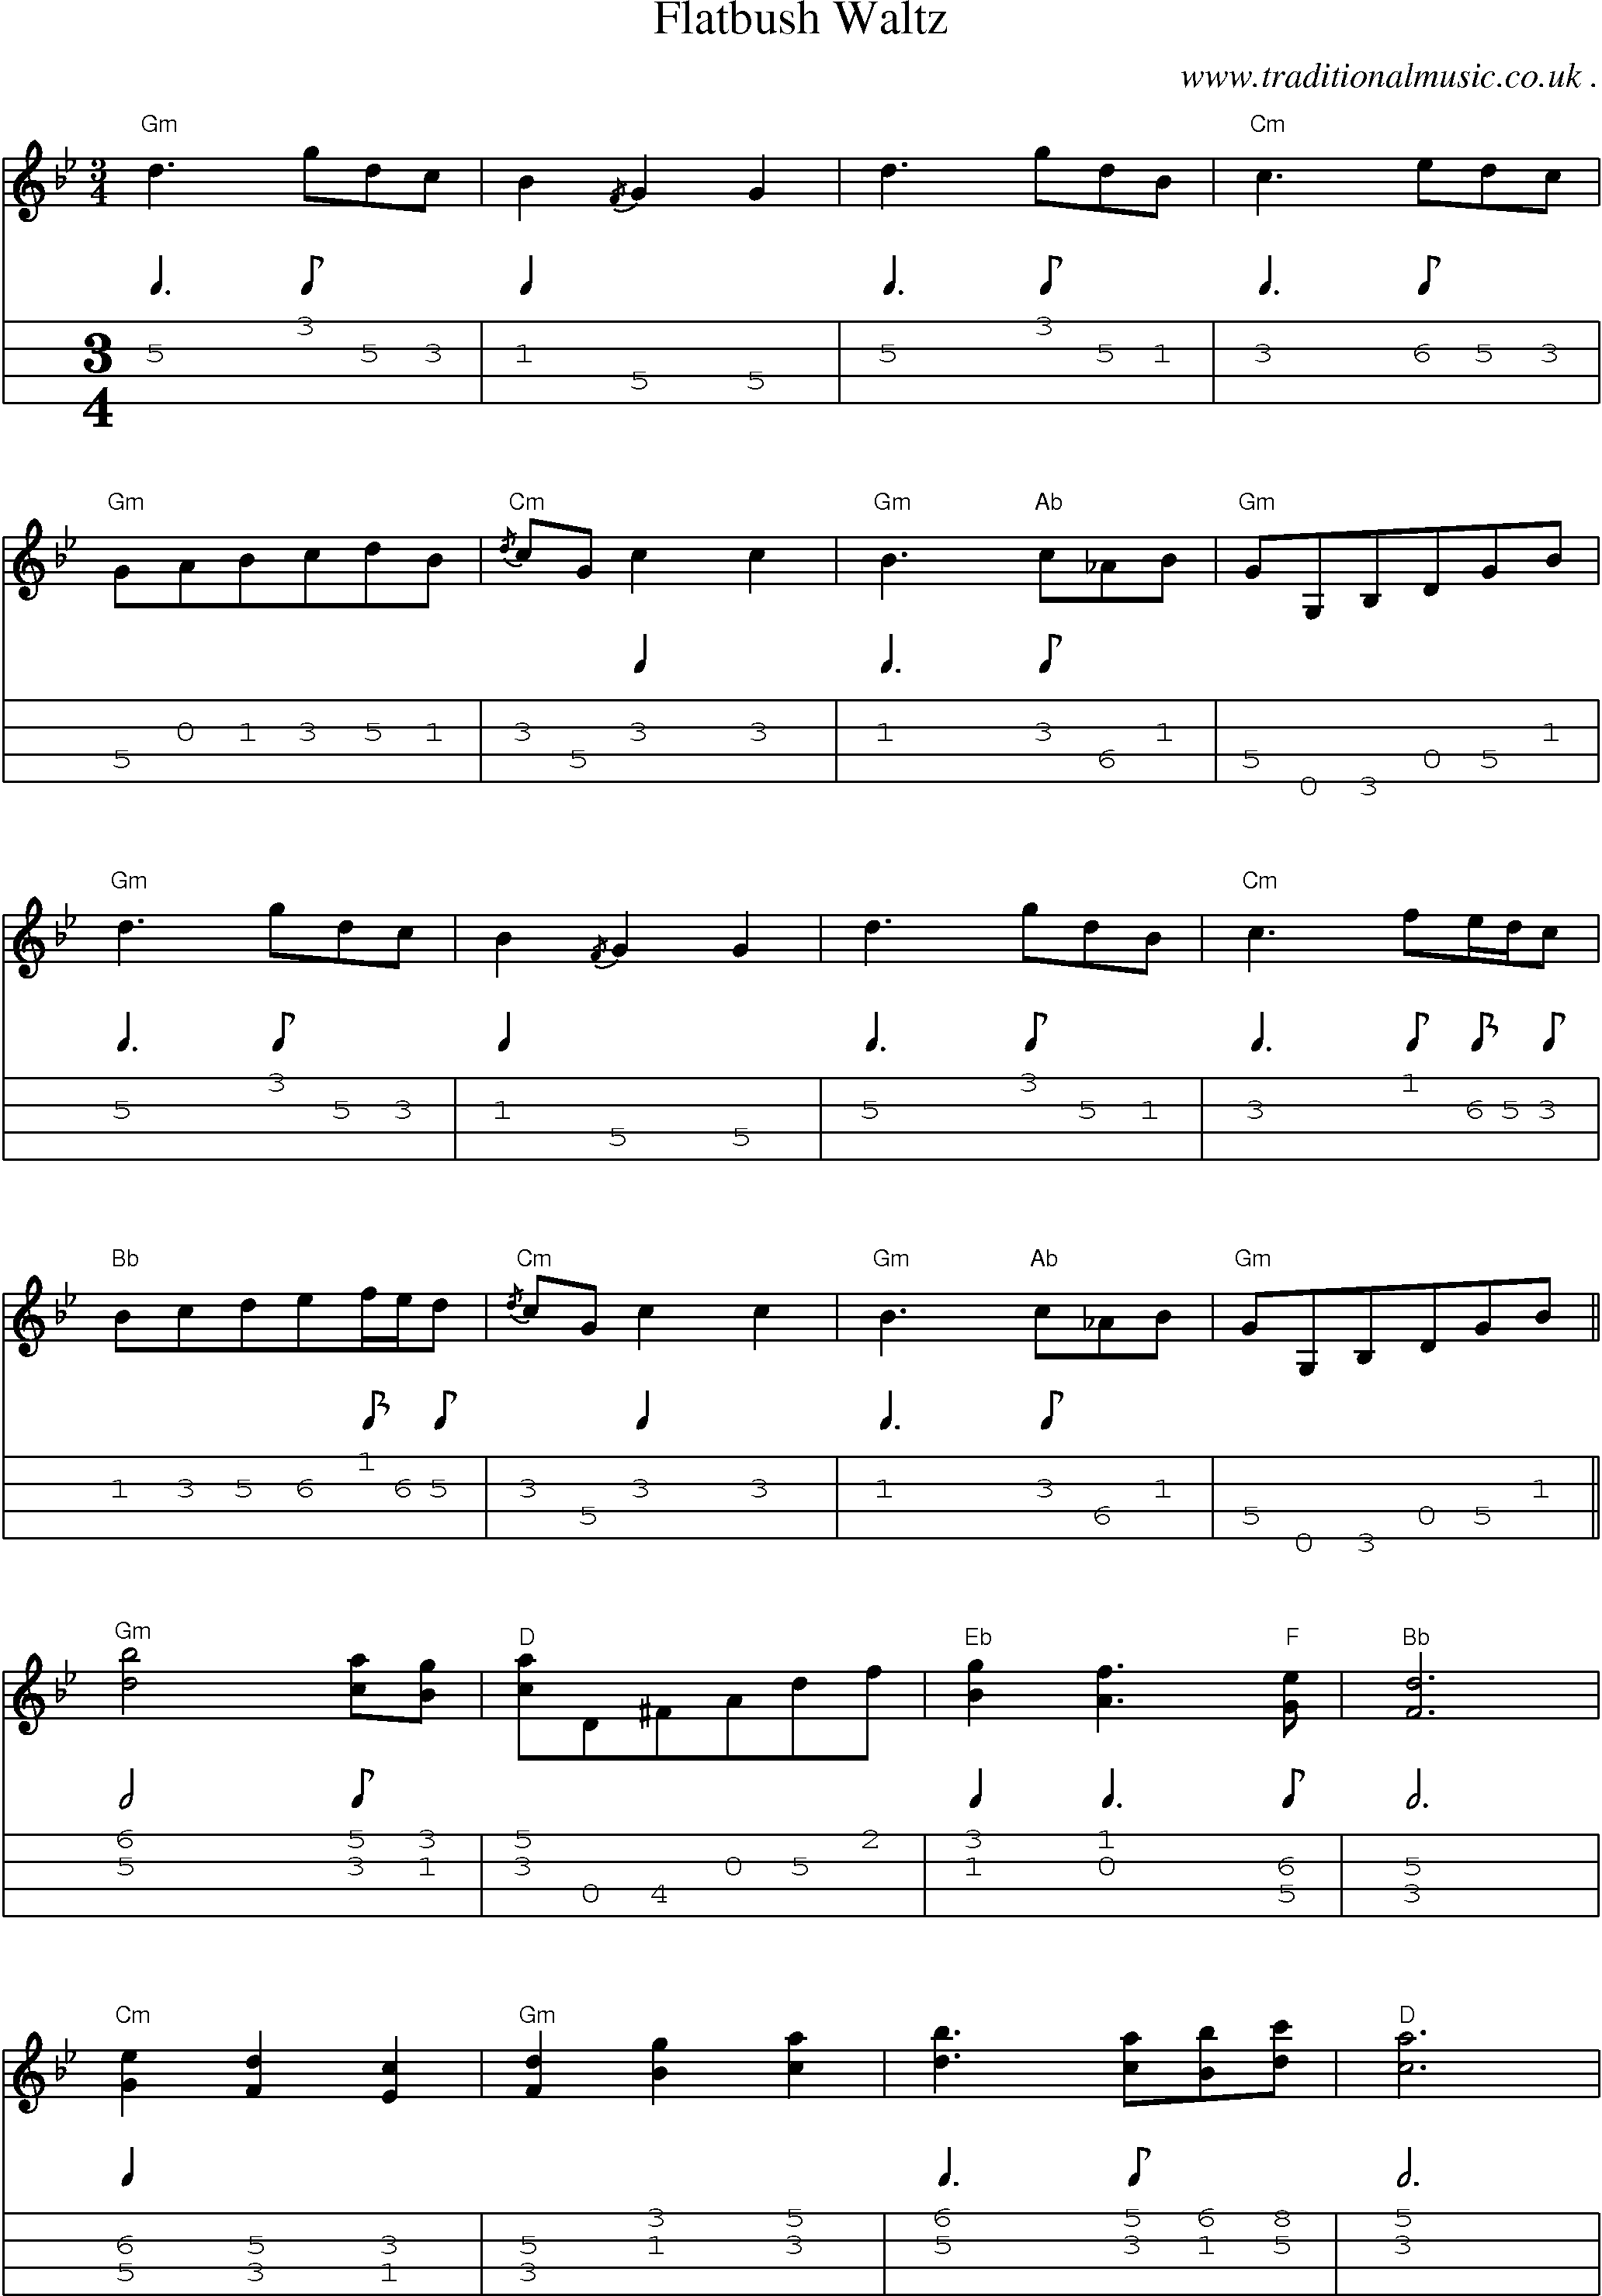 Music Score and Guitar Tabs for Flatbush Waltz